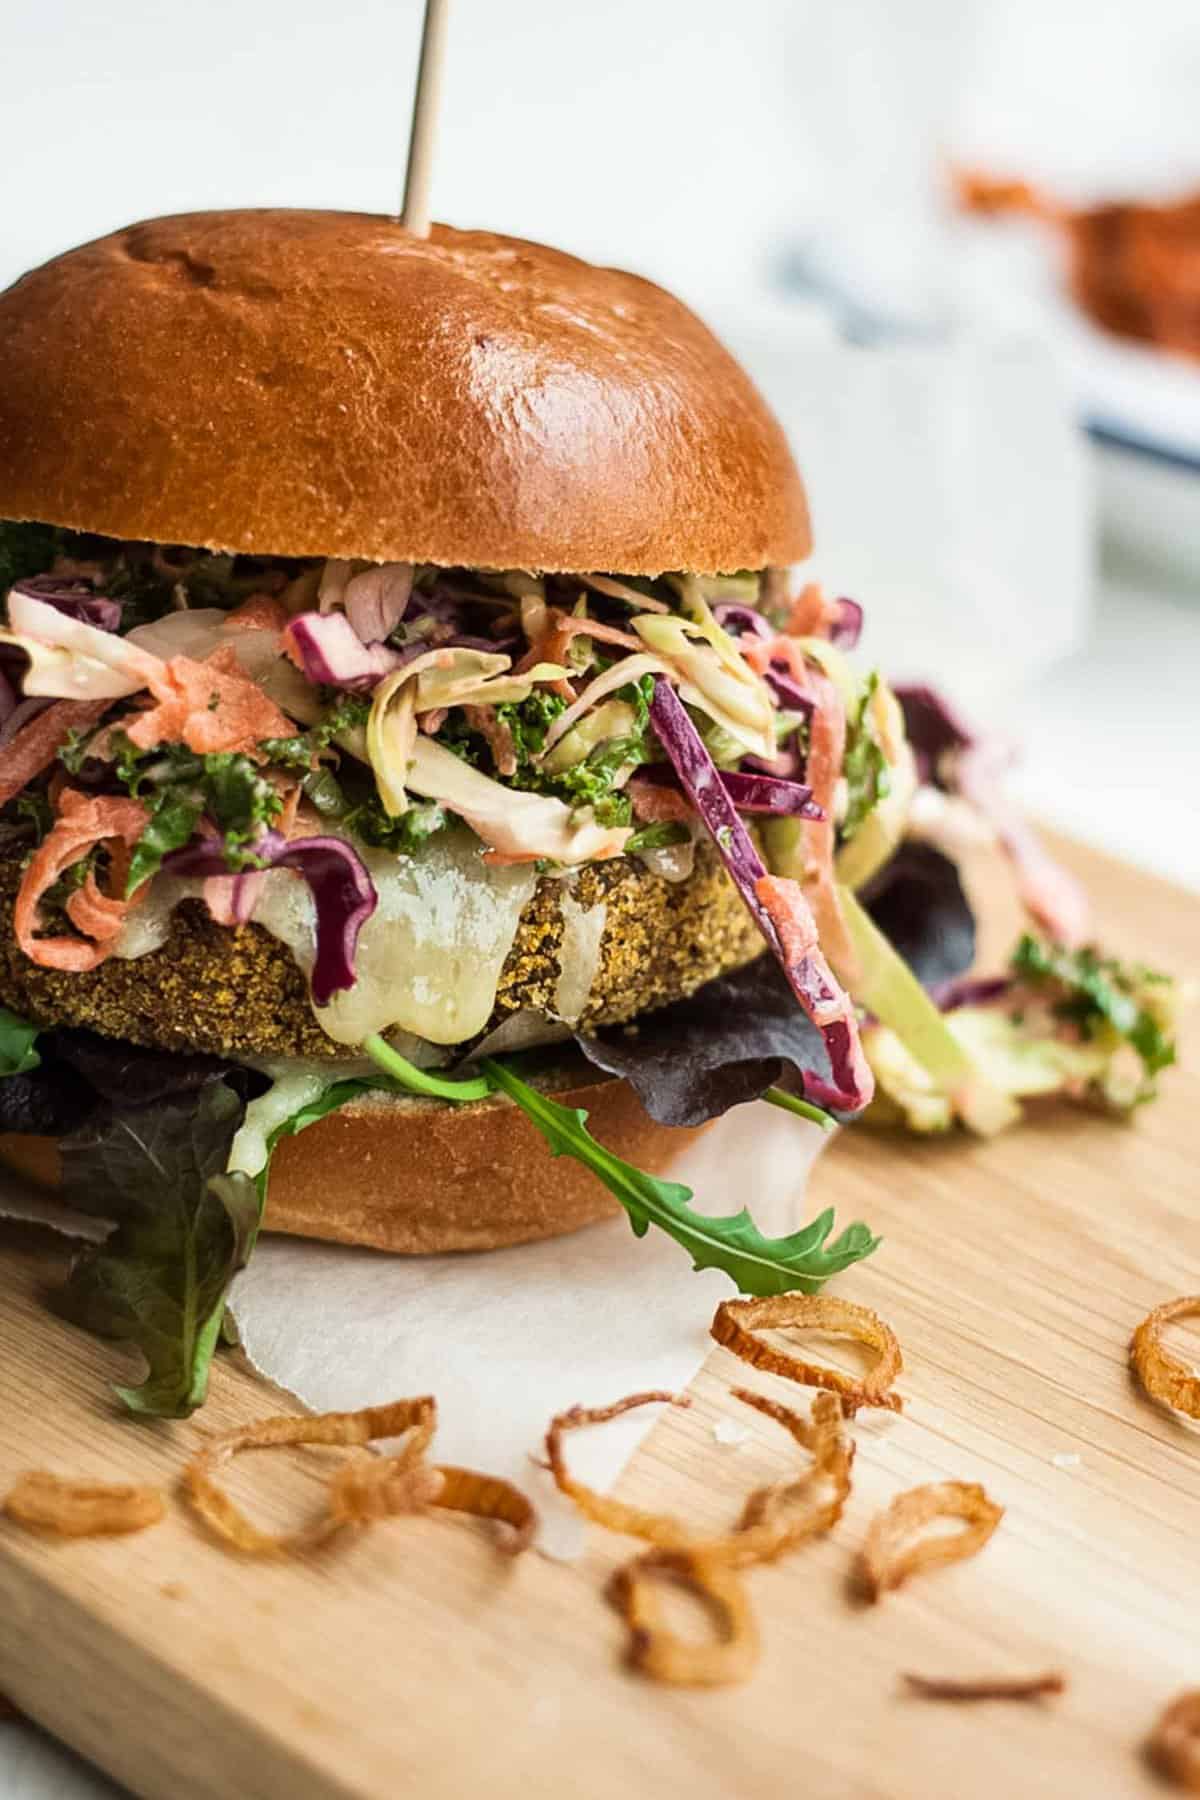 A close up of a veggie burger packed with slaw on a wooden board.